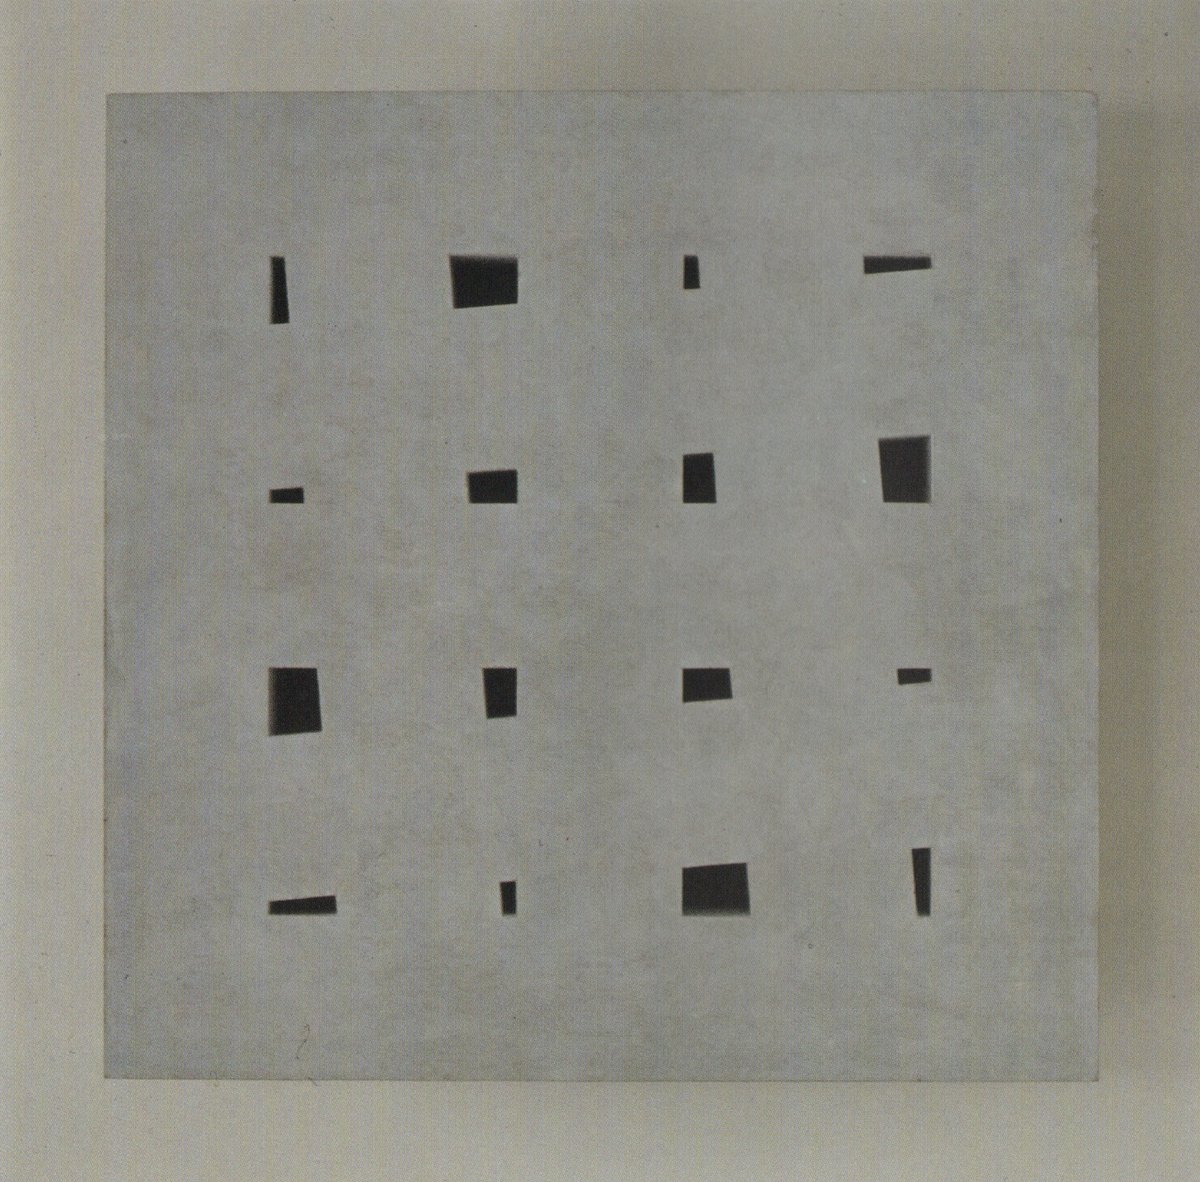 (fig. 7) &quot;untitled theme: pierced blue square&quot; (1986), acrylic, marble on board, 122 x 122 x 21 cm